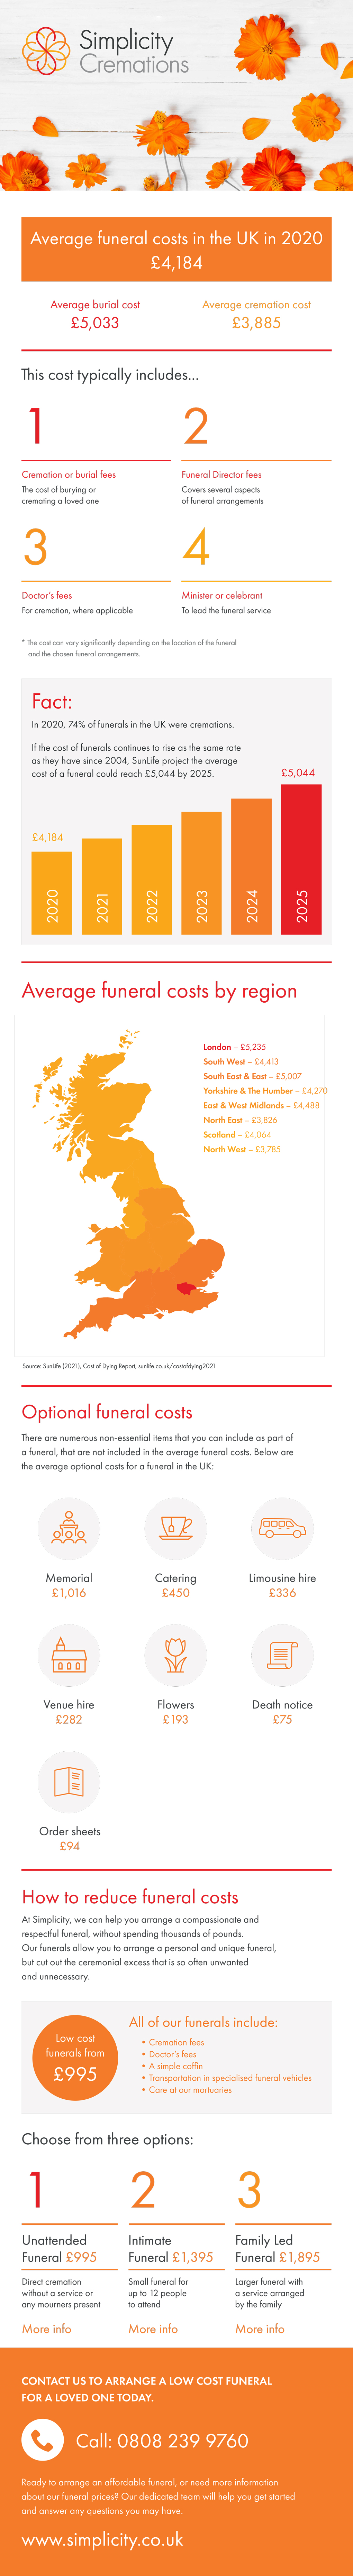 Average funeral costs infographic